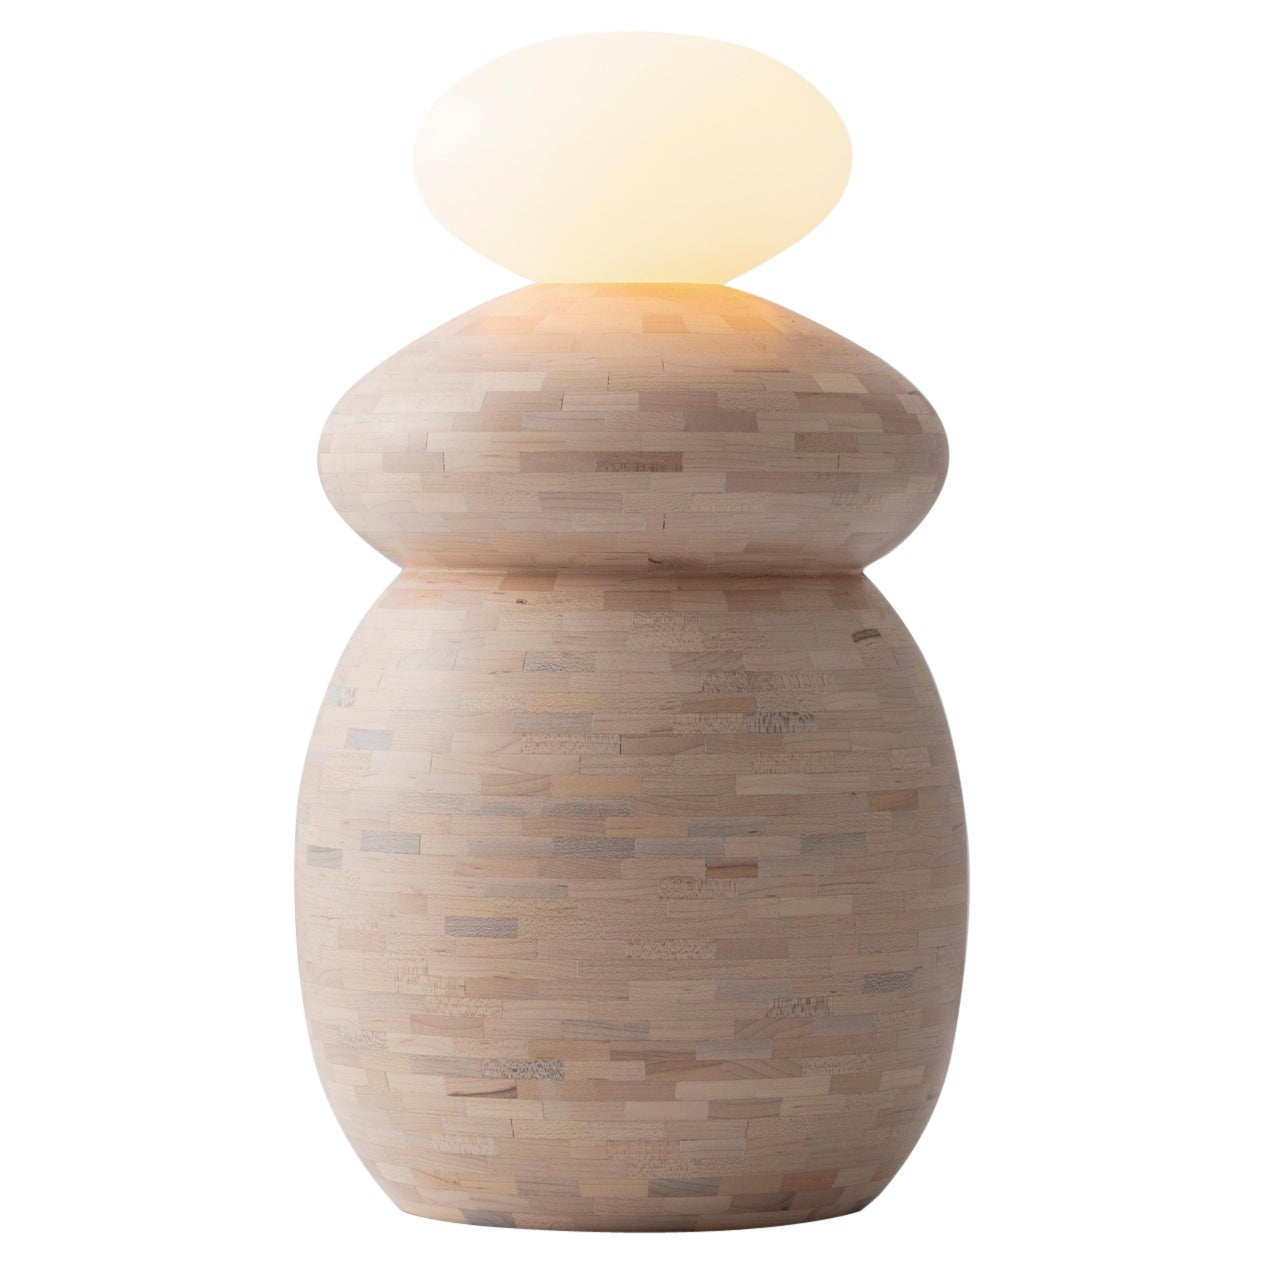 STOCKED Cairn Light n°1, finition blanc os, disponible maintenant